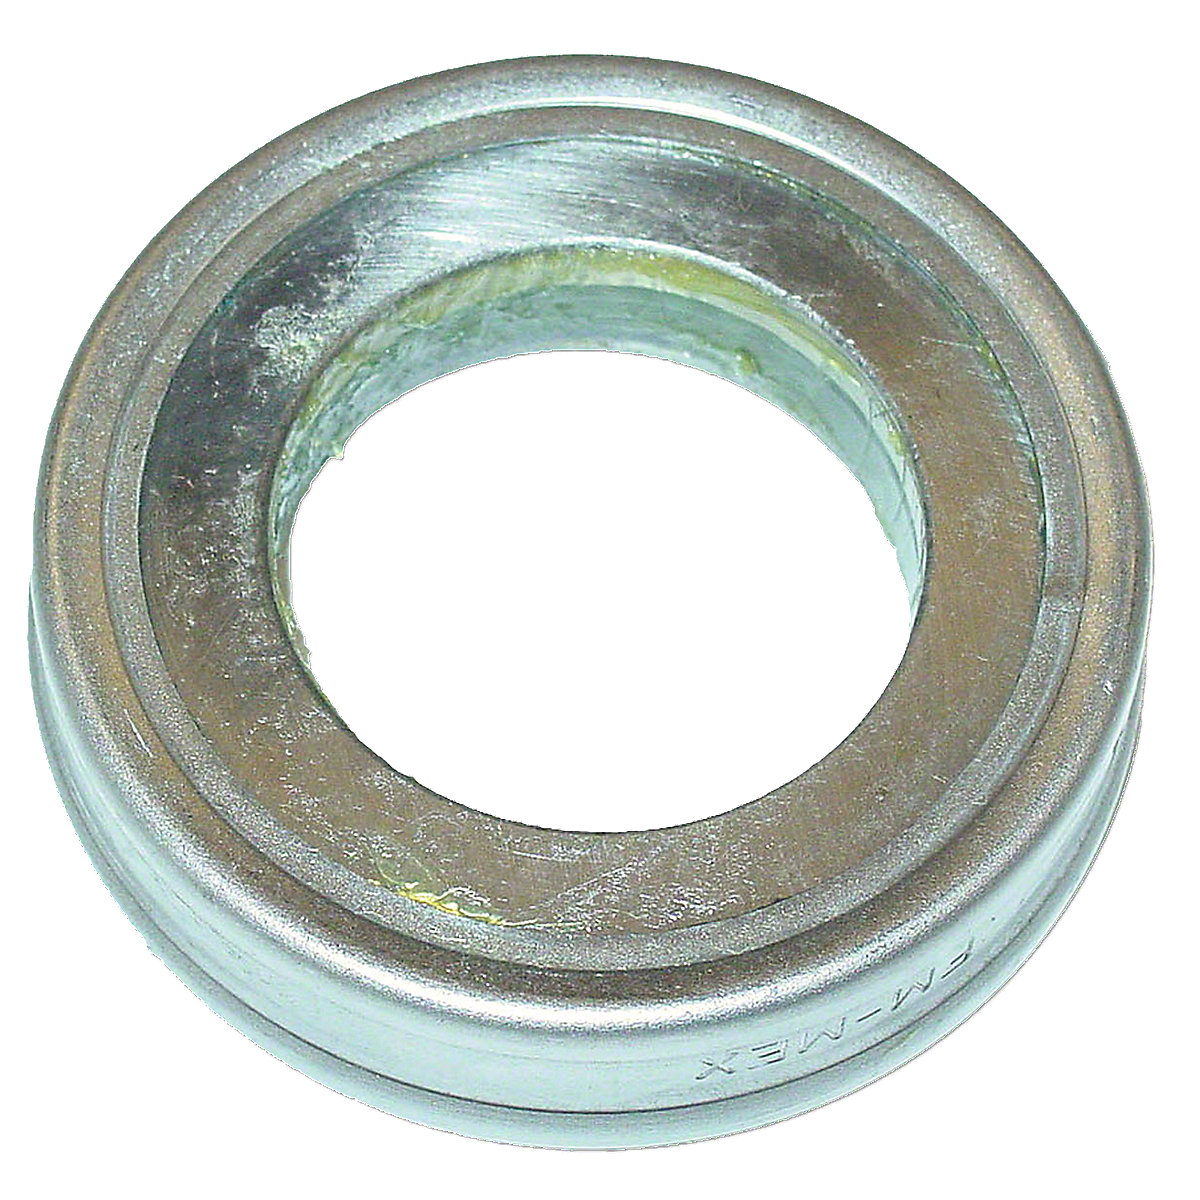 Throw Out Bearing For Massey Harris: Colt 21, Mustang 23, Pacer 16, Pony, 101 Jr, 102 Jr, 20, 22, 30, 81, 82.